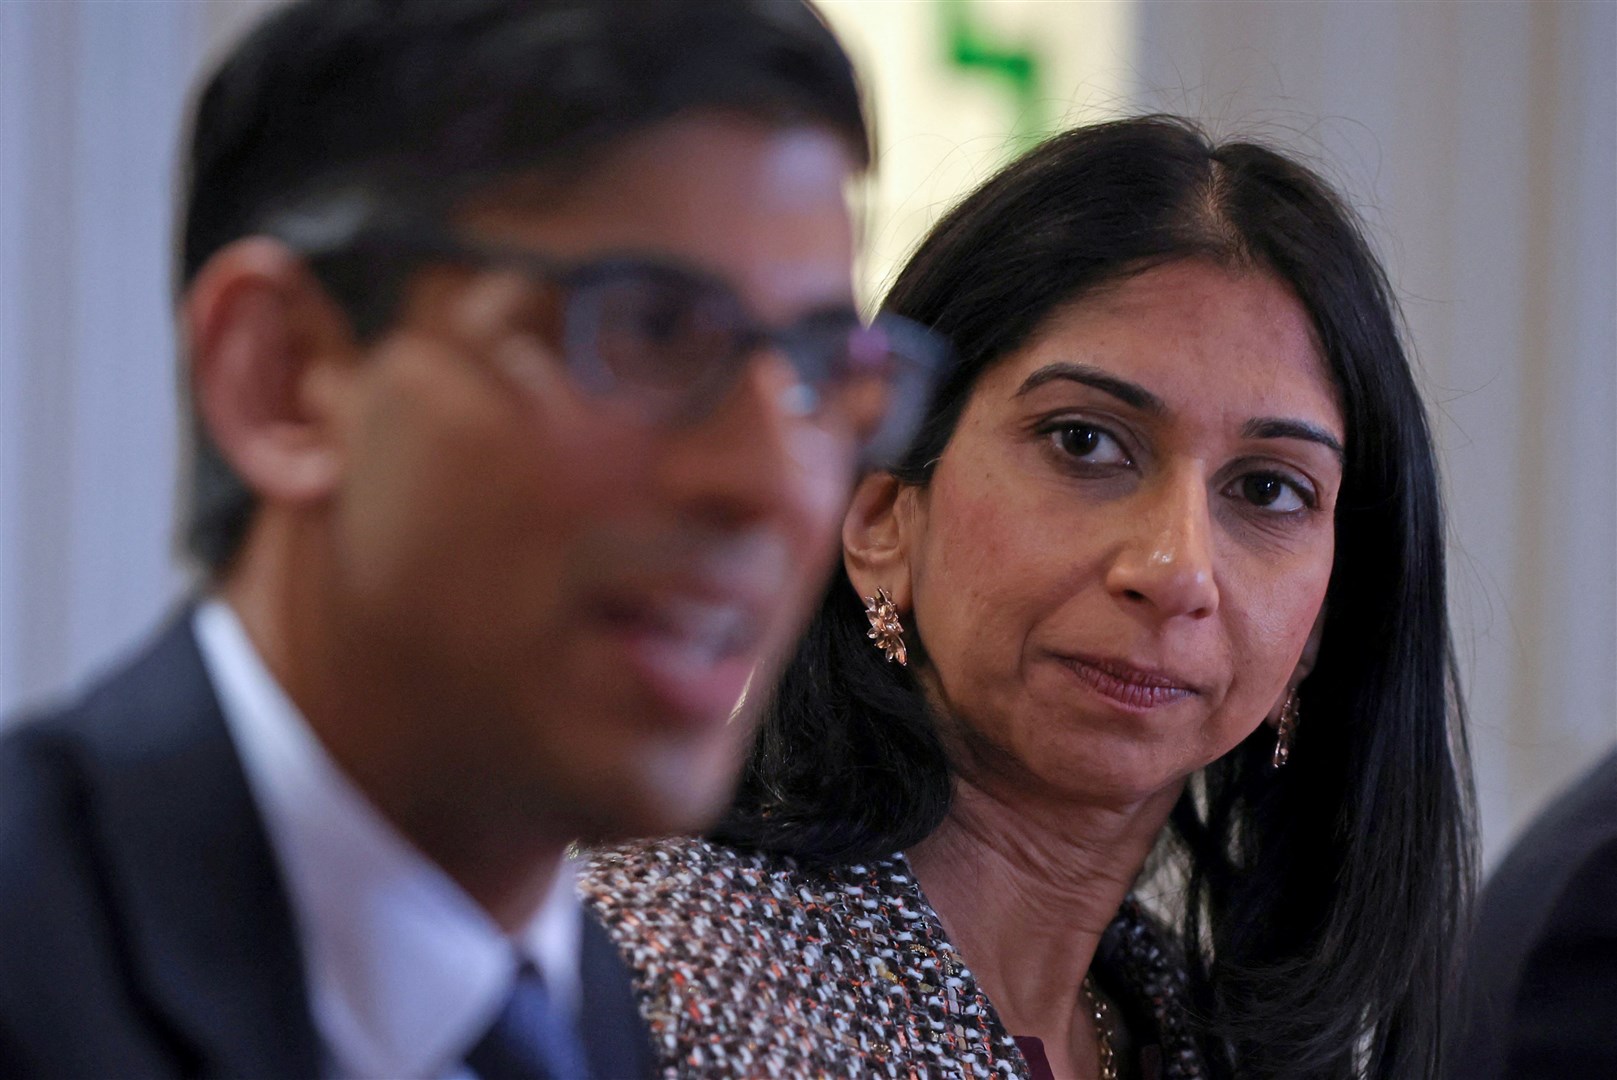 Suella Braverman reportedly told Rishi Sunak she was concerned about inviting more migrants to the UK (Phil Noble/PA)